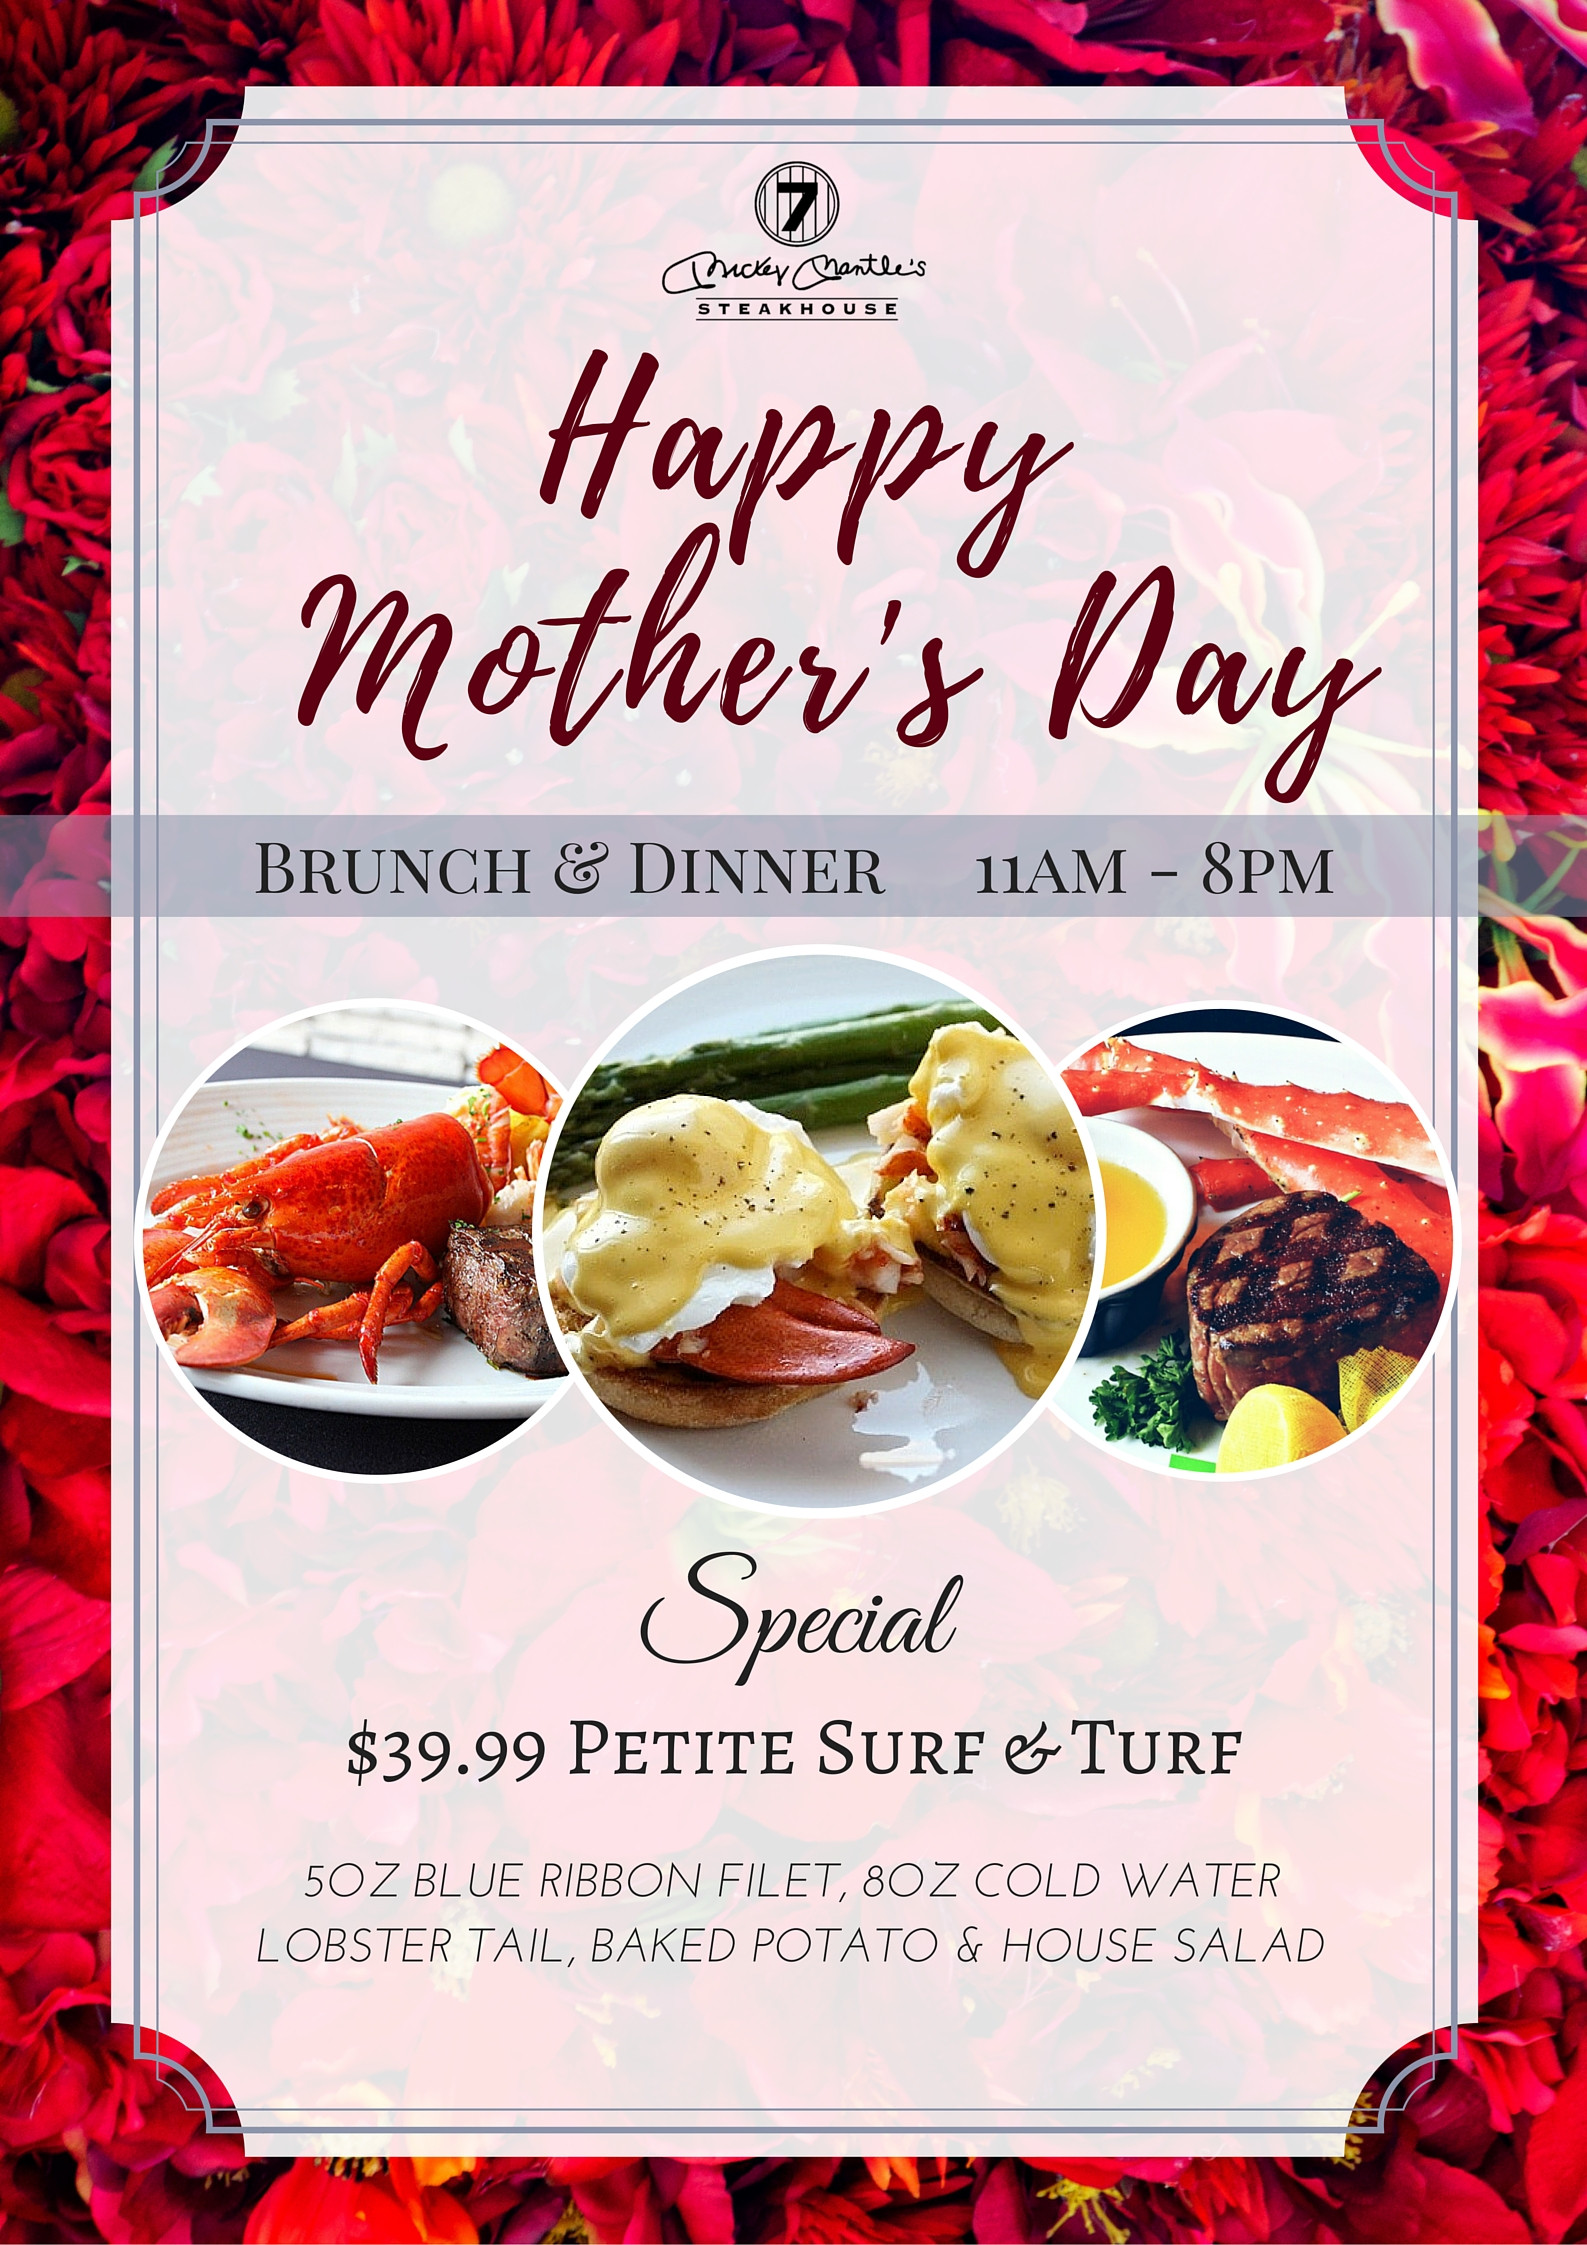 Best Mothers Day Dinner
 Mother’s Day Brunch & Dinner Mickey Mantle s Steakhouse